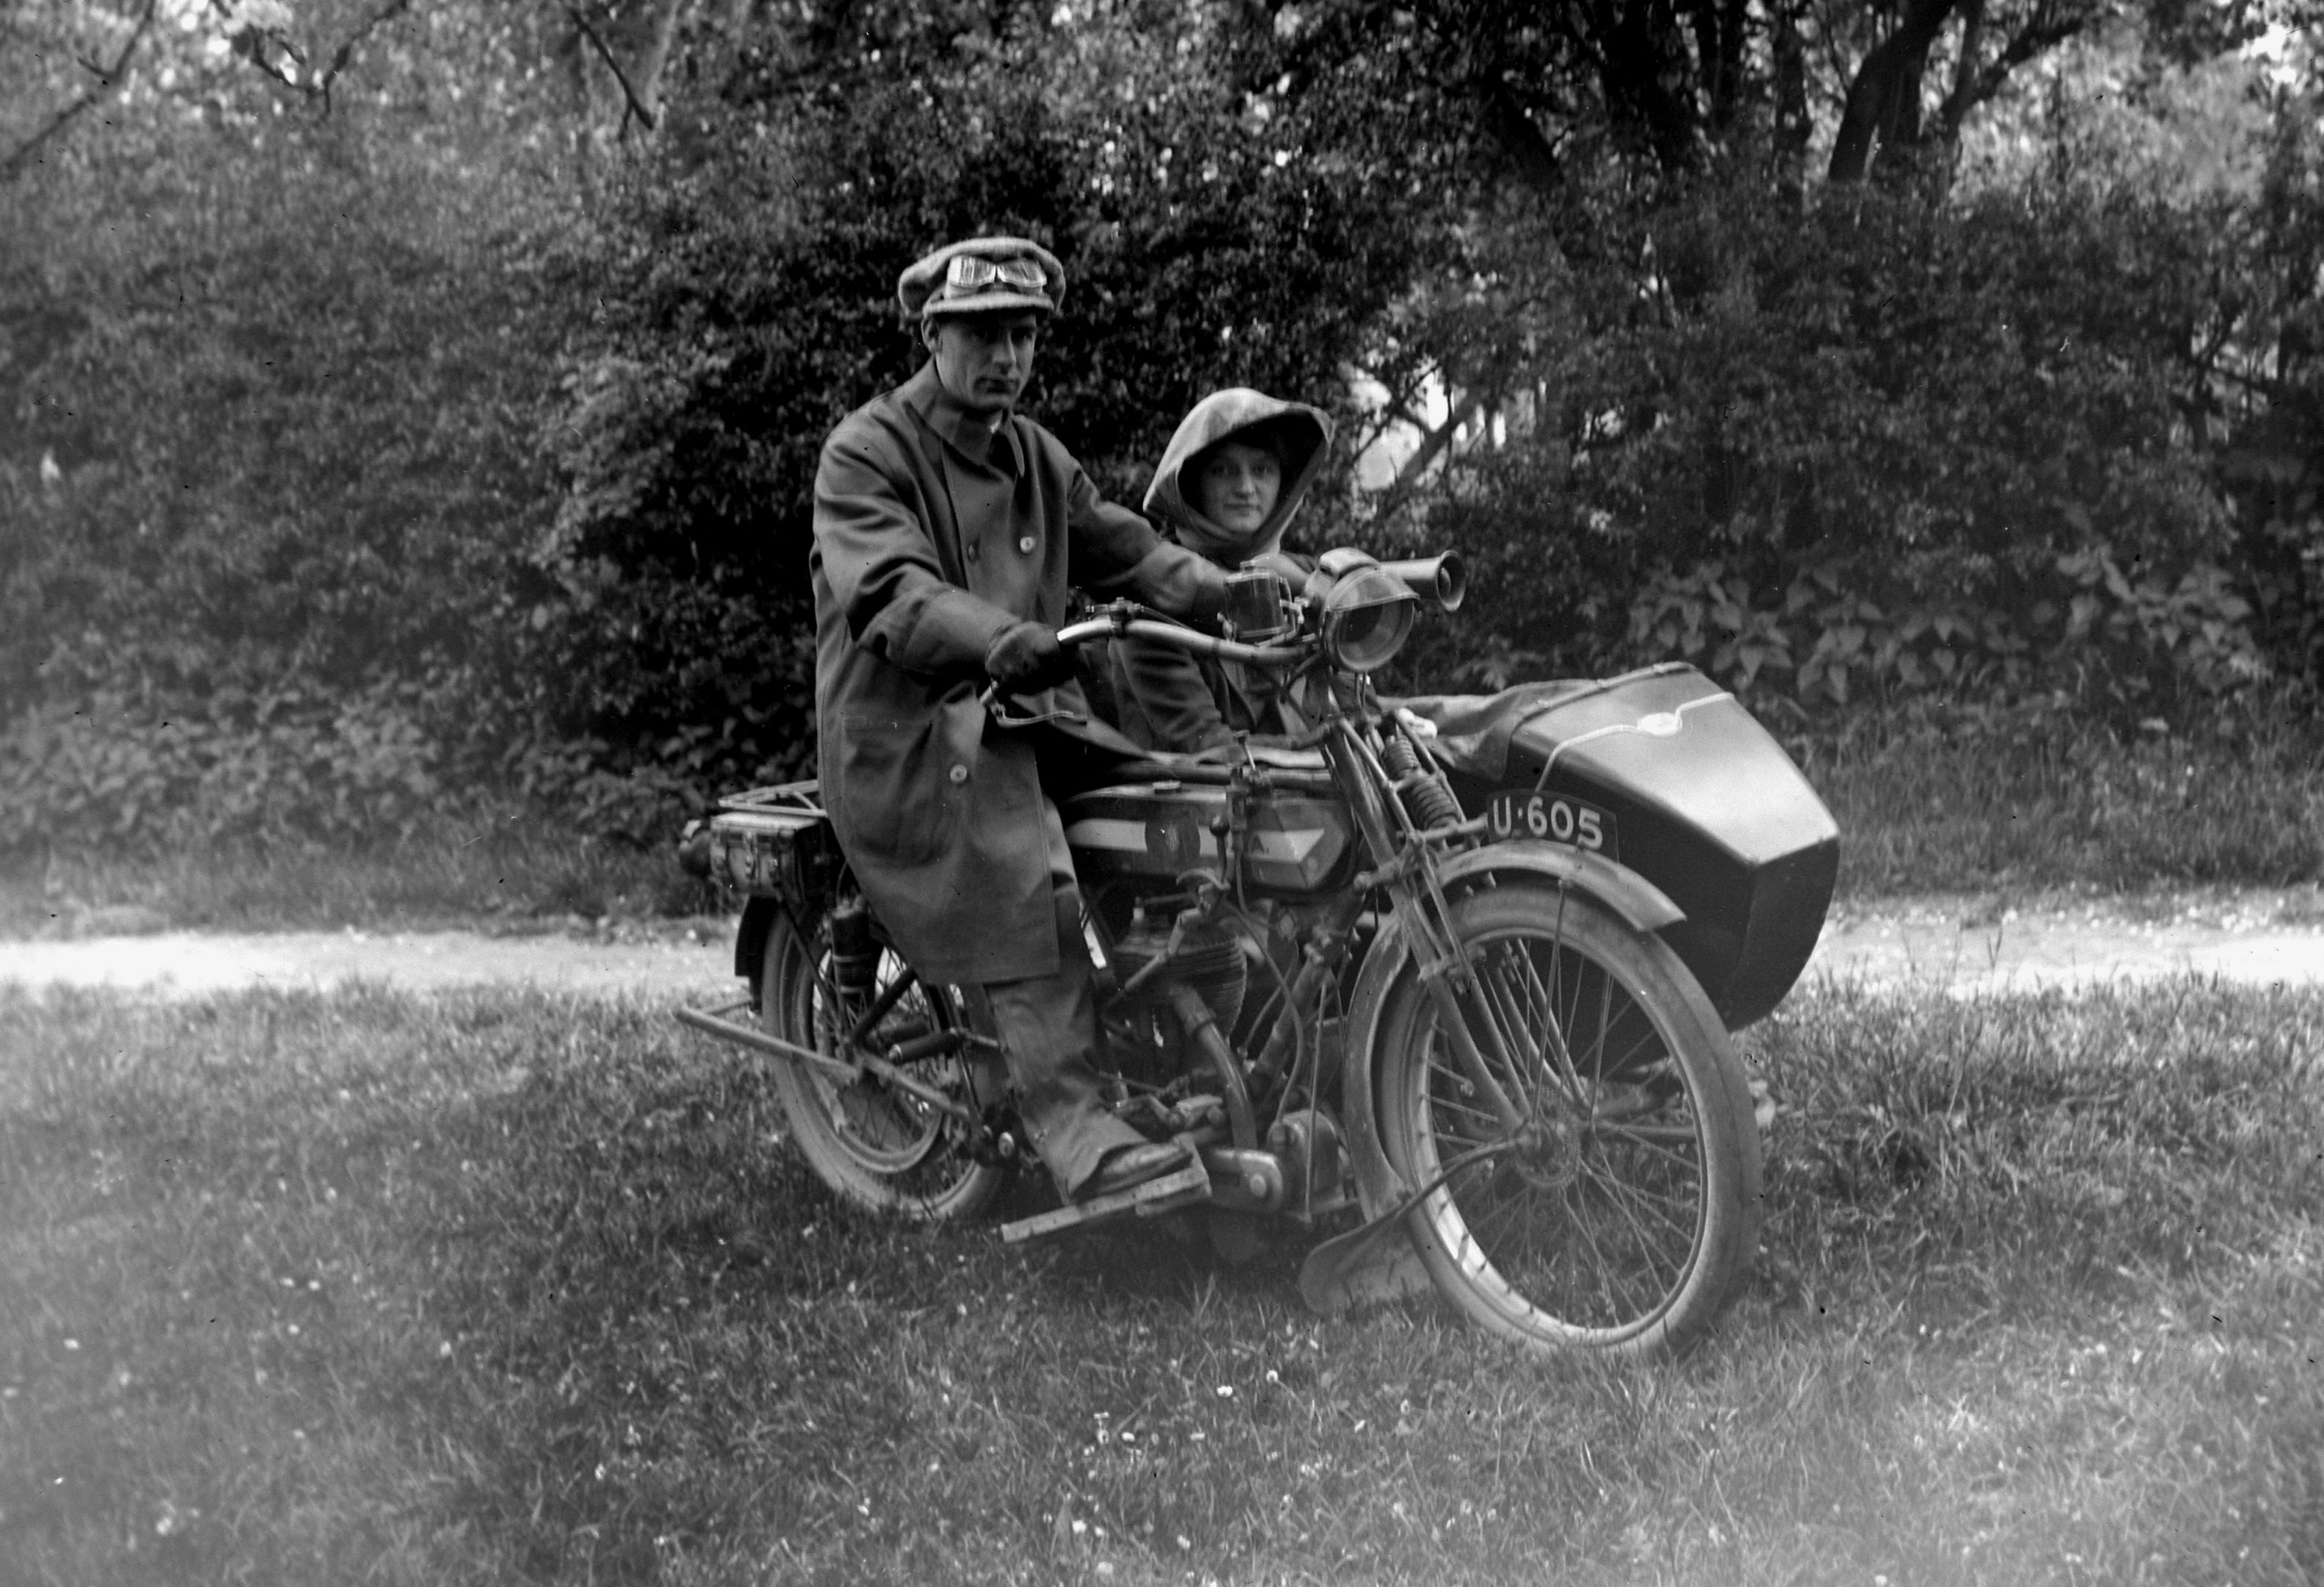 A motorbike and sidecar dated from 1920s. From a collection of photographs by local amateur photographer Louisa Kruckenberg.